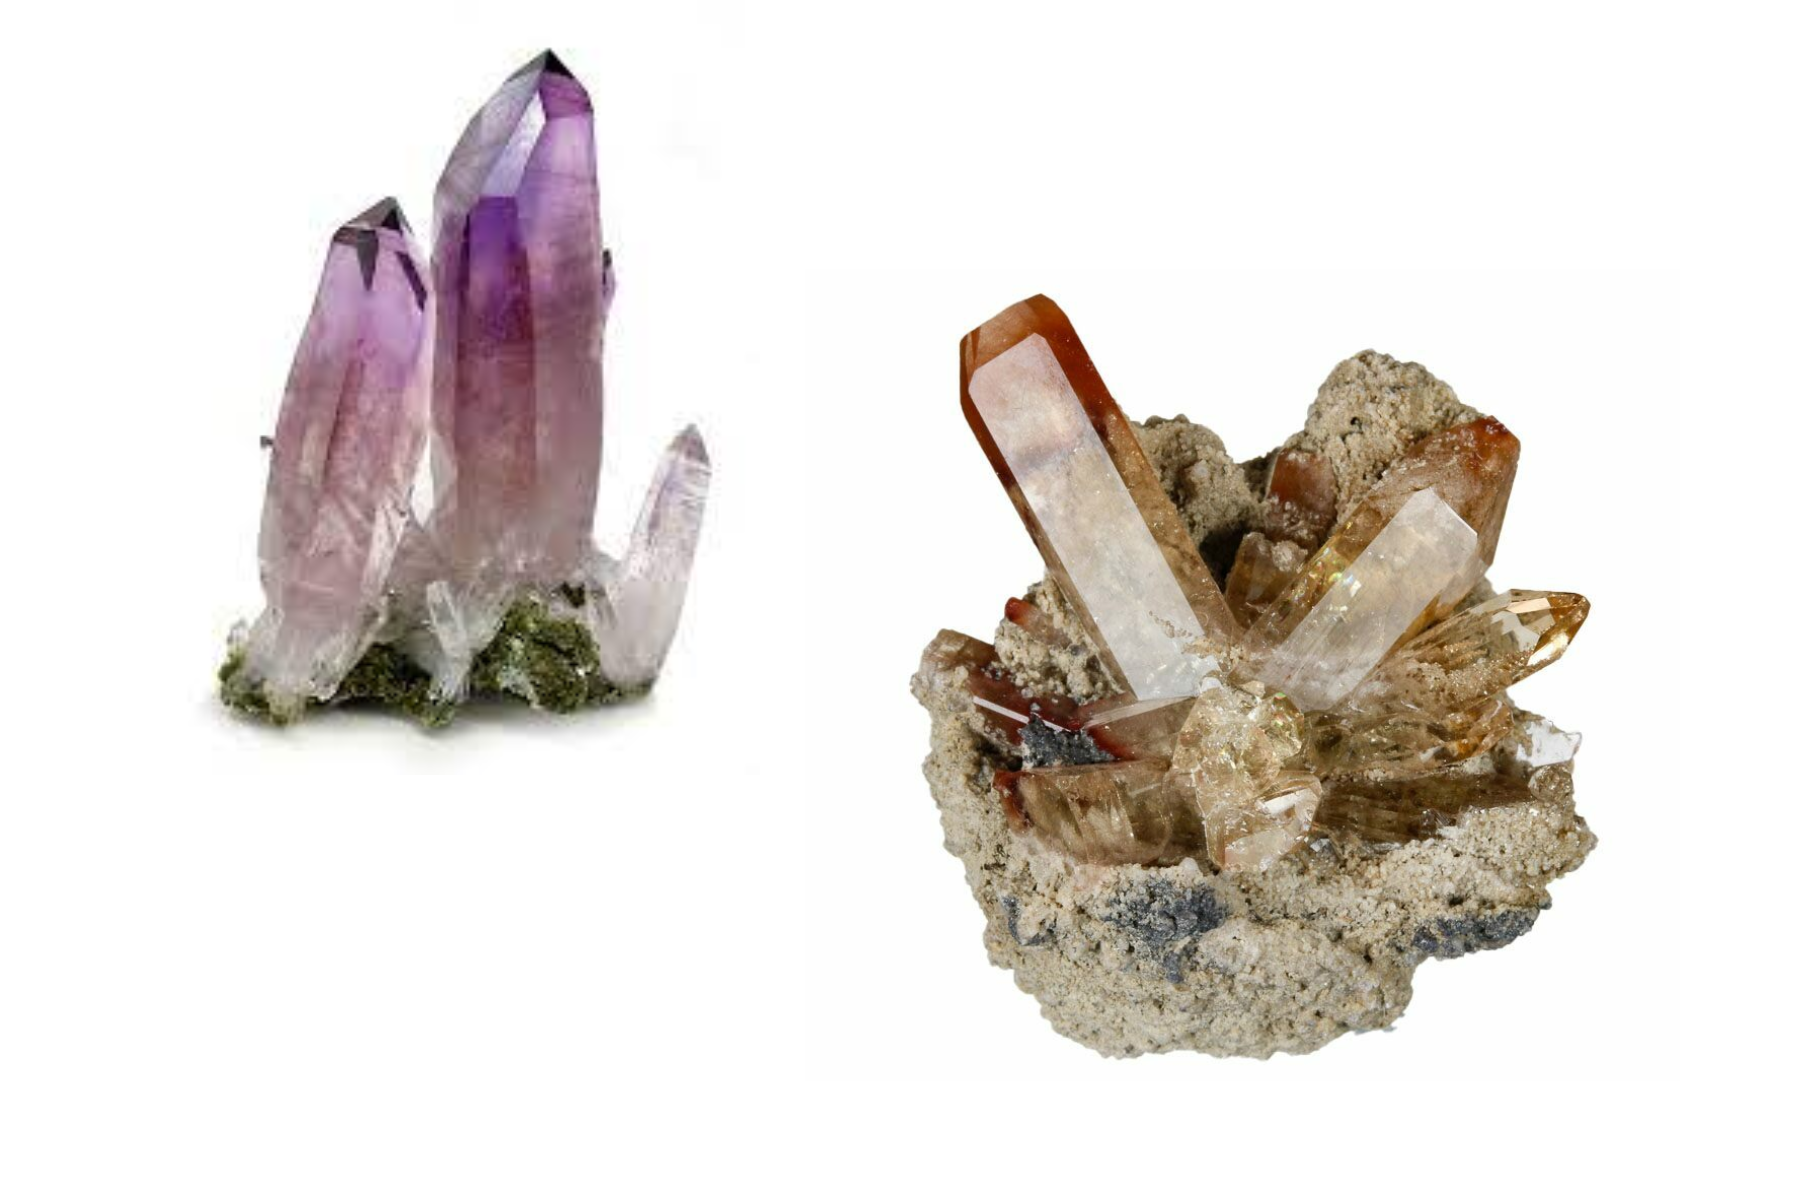 The Amethyst and Topaz stone from Mexico